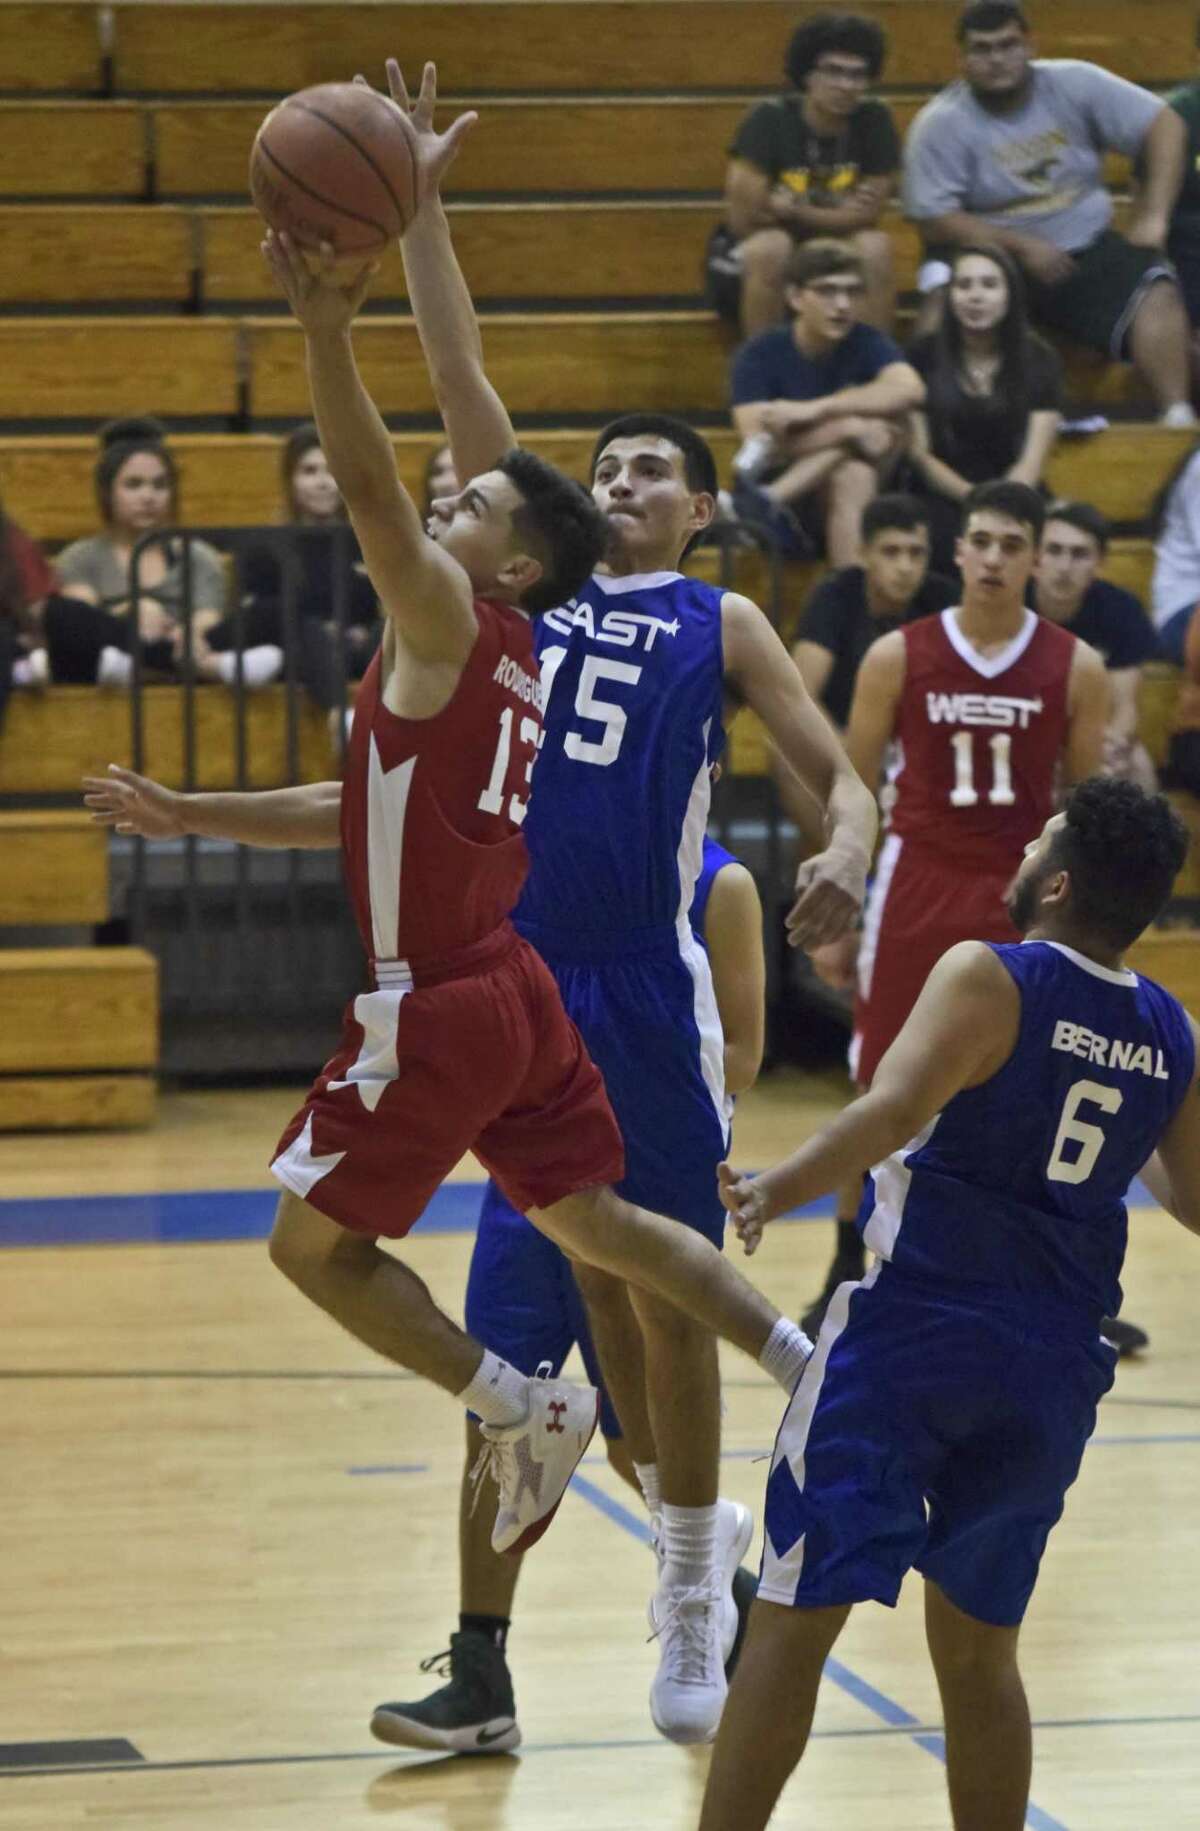 West All-Star Devin Rodriguez tallied 10 points as his team won the Bosom Buddies East/West All-Star game 91-74 on Wednesday at St. Augustine.